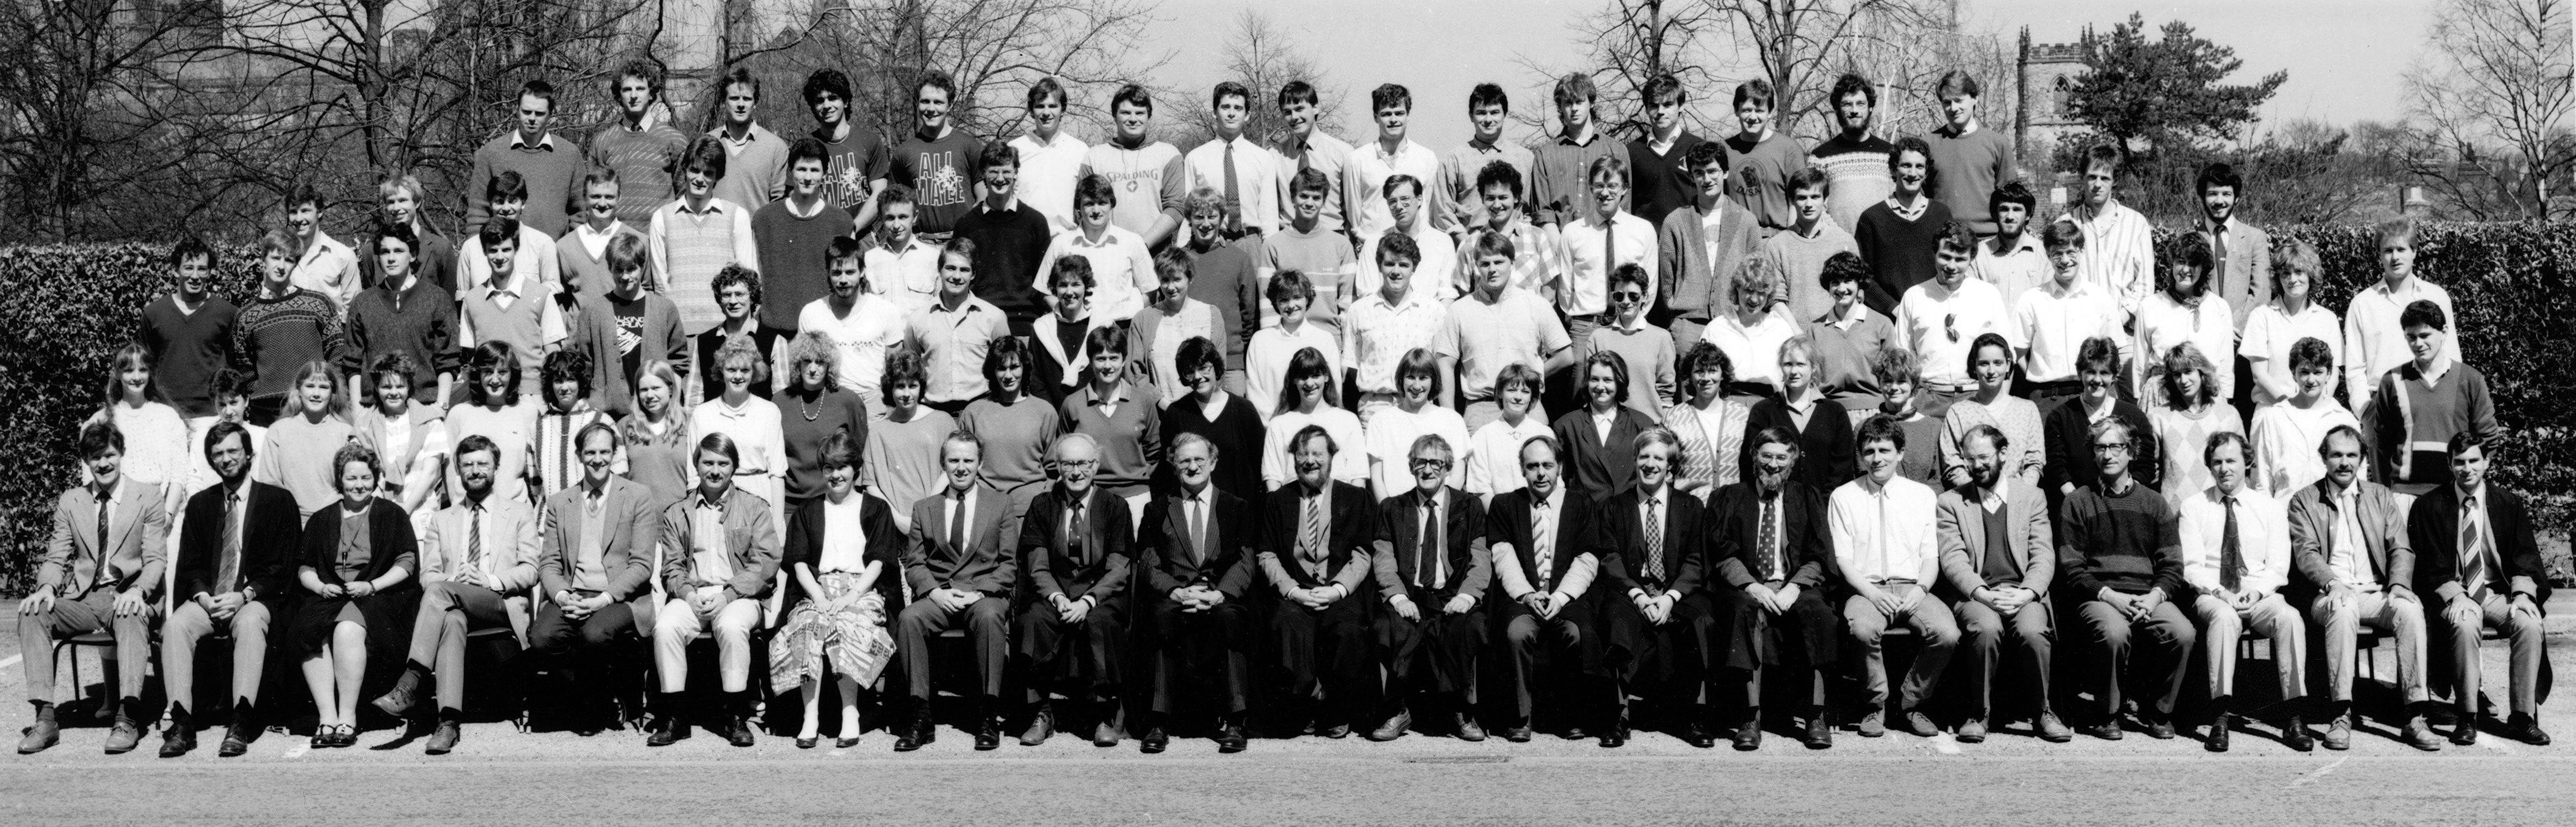 Geography Department Undergraduate Group photo from 1986